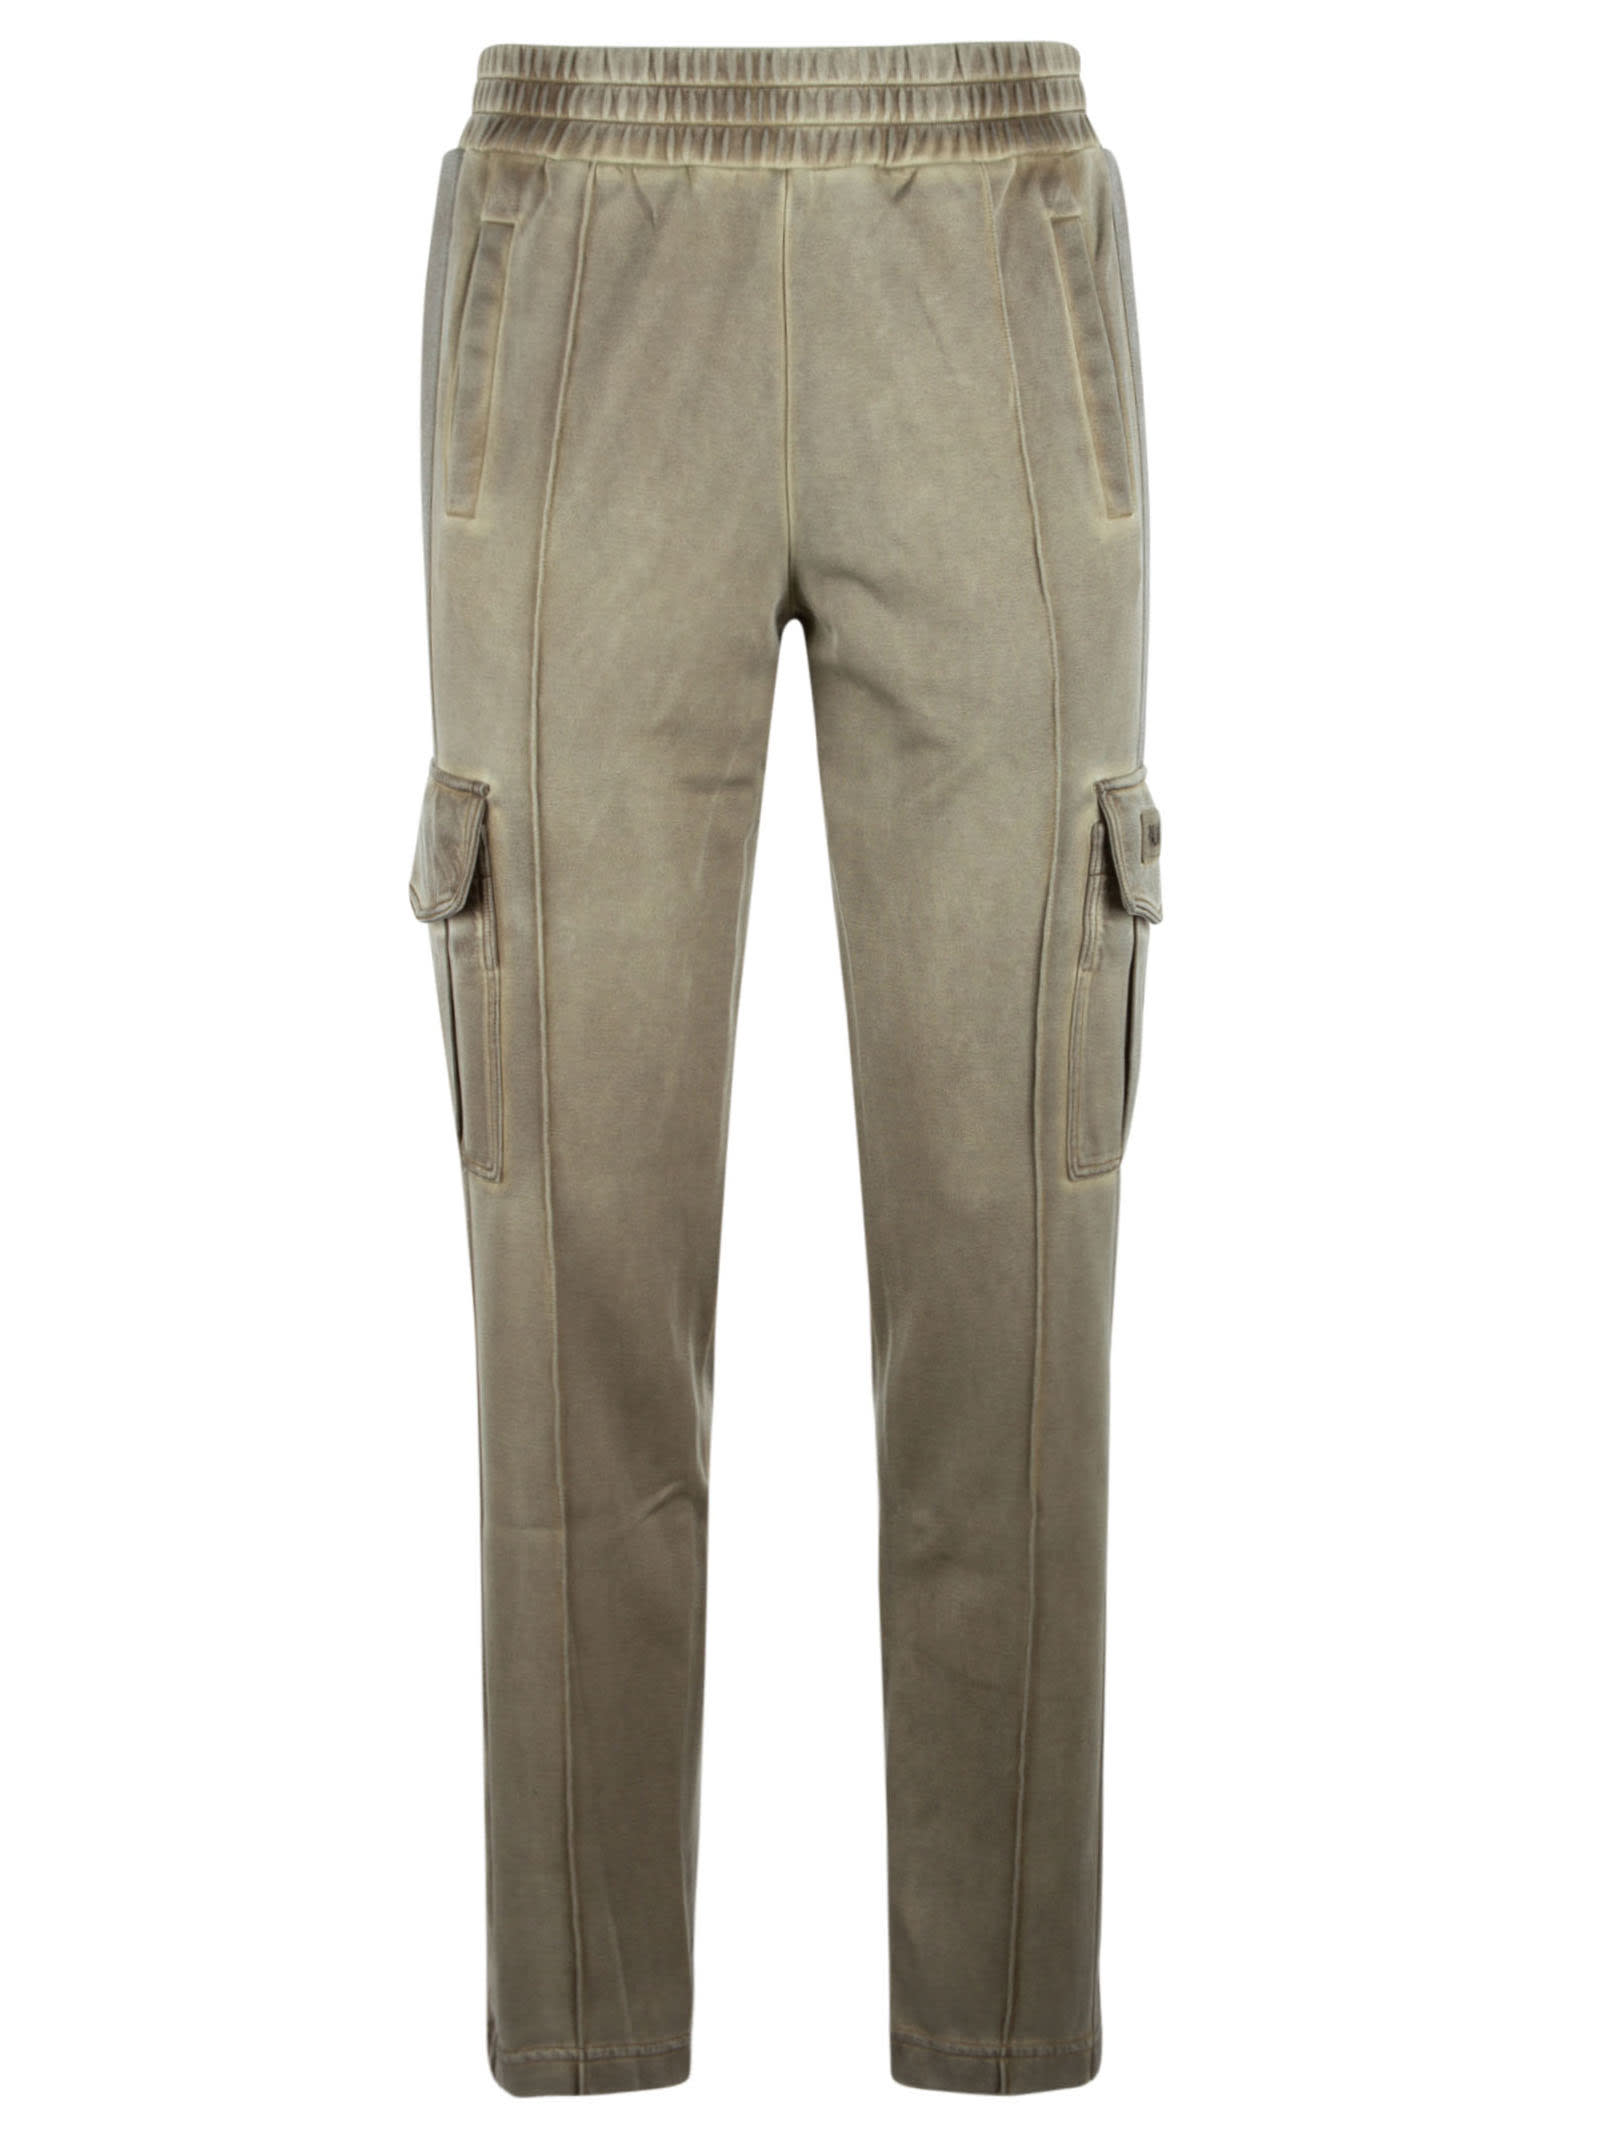 Palm Angels Gd Cargo Track Pants